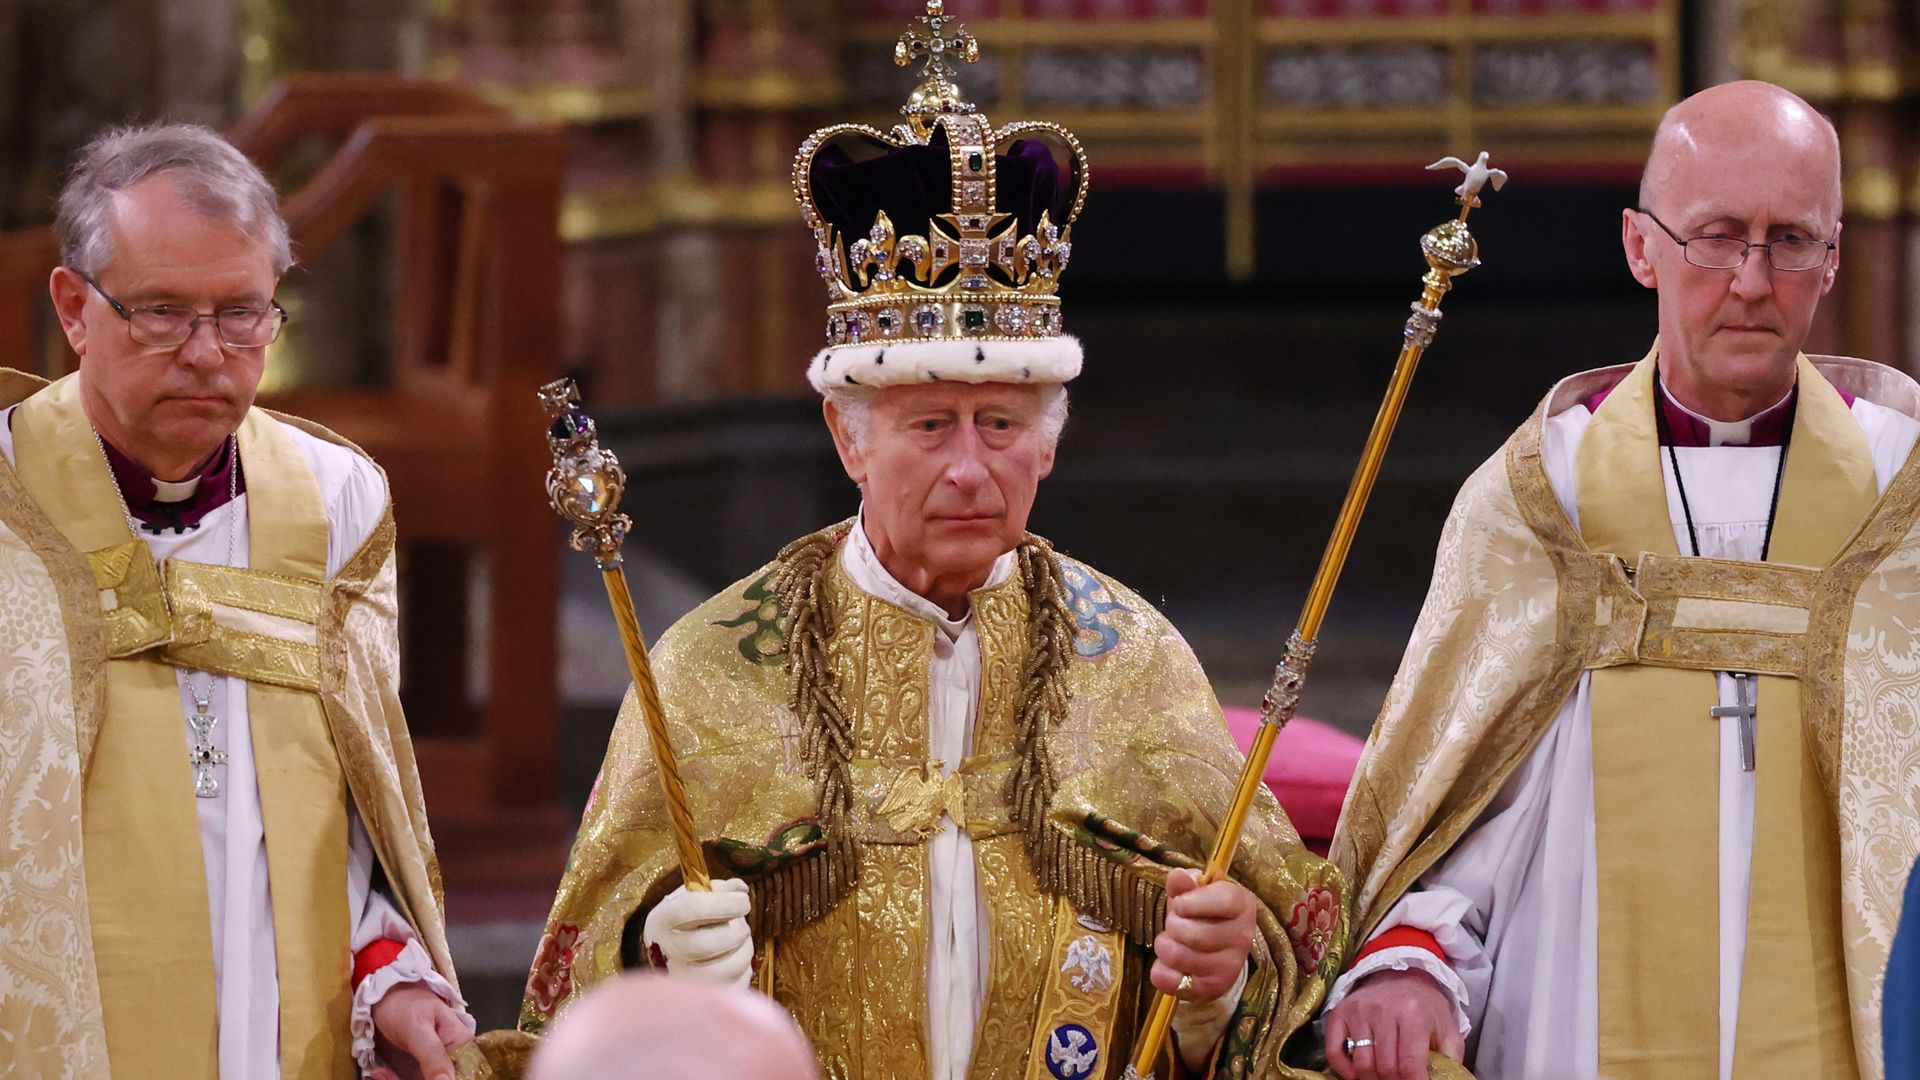  King Charles III stands after being crowned during his coronation ceremony in Westminster Abbey